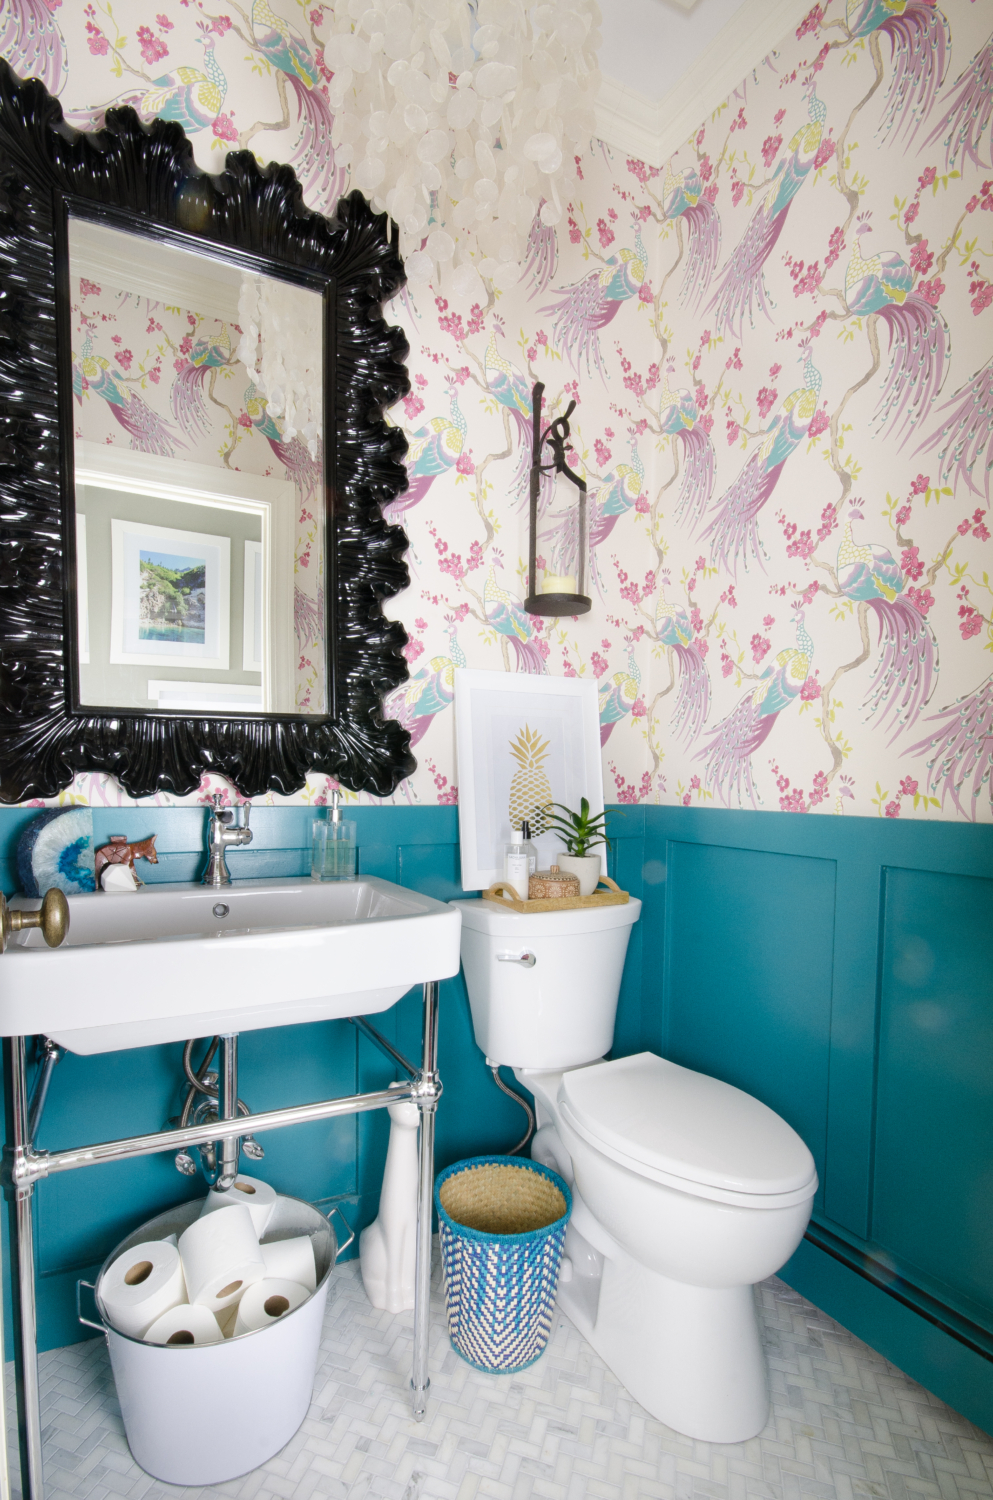 A small powder room gets a majorly gorgeous makeover, including marble tile, teal wainscoting, console sink, bird wallpaper, and capiz shell pendant. You won't believe this before and after!